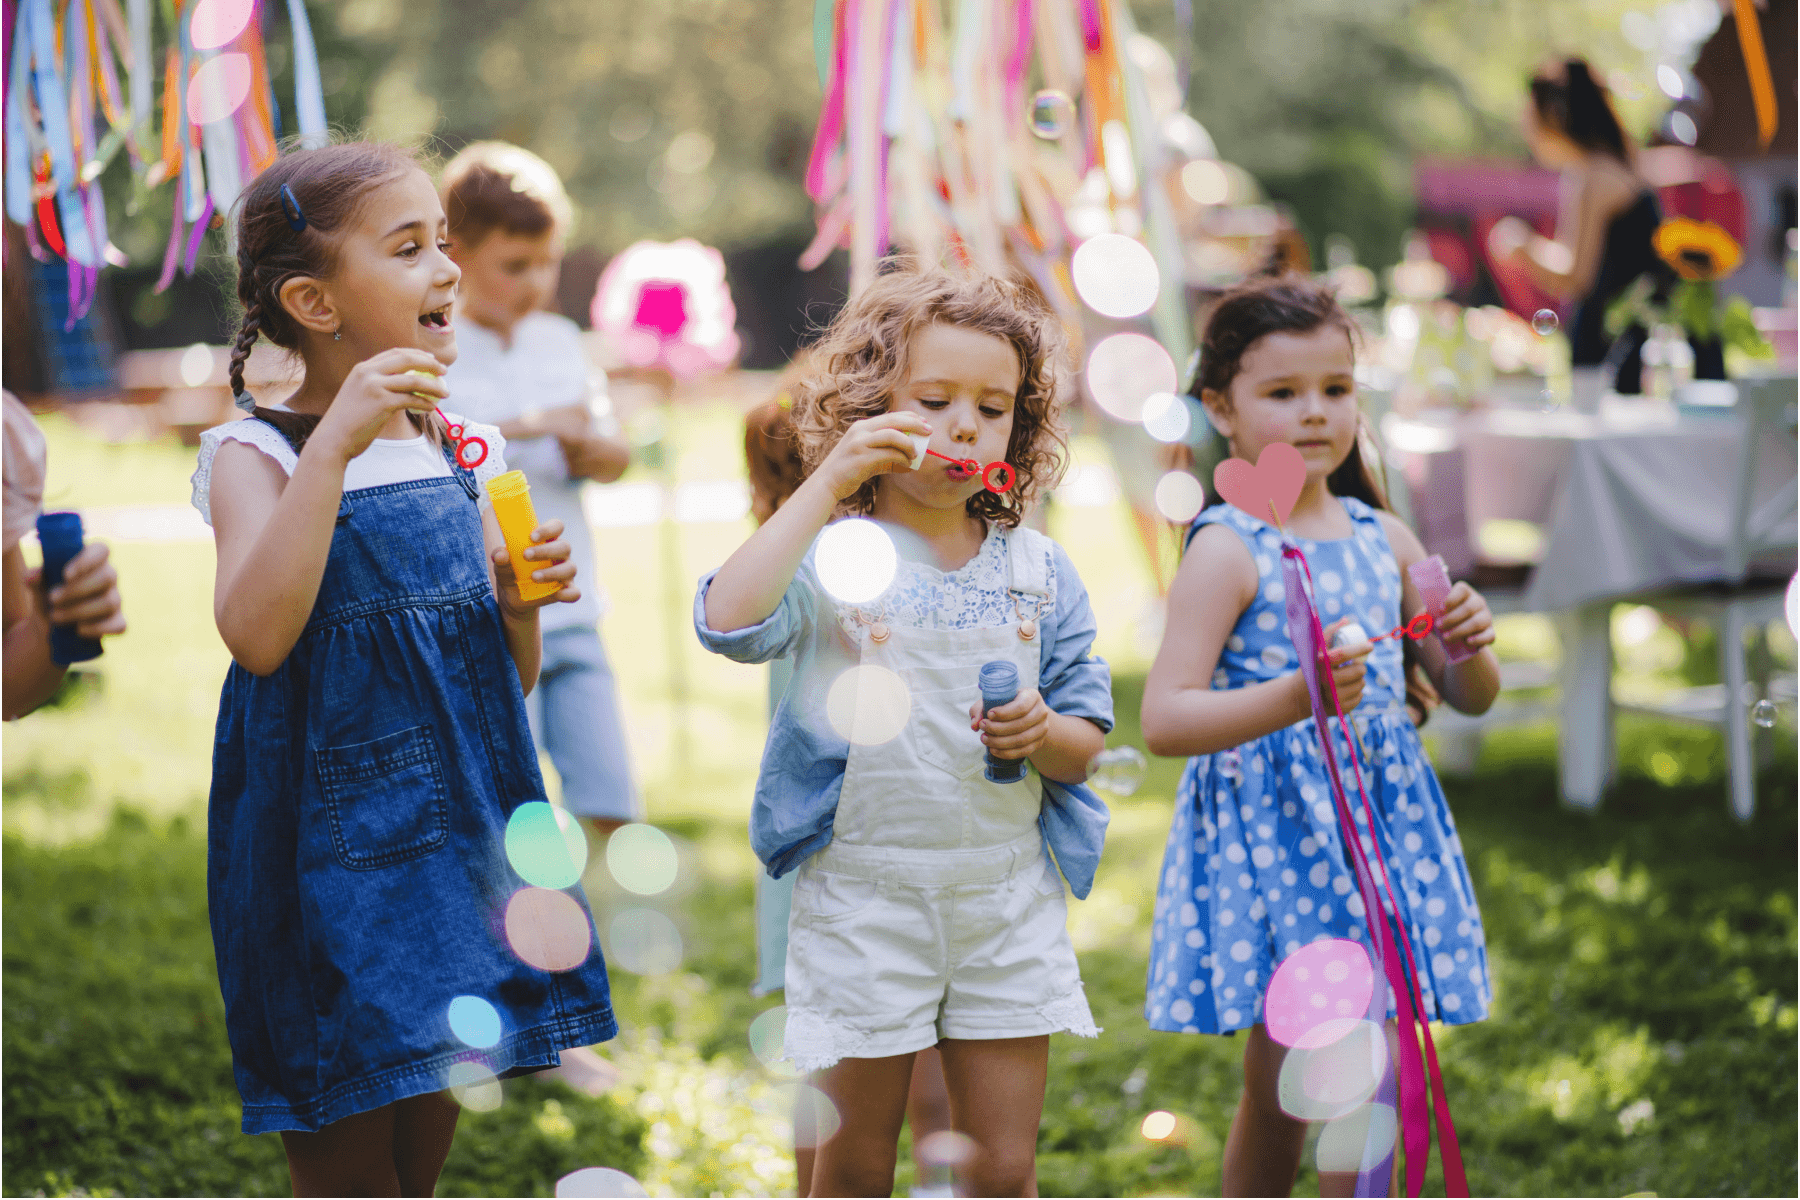 Three young children blow bubbles at an outdoor party with streamers behind them.